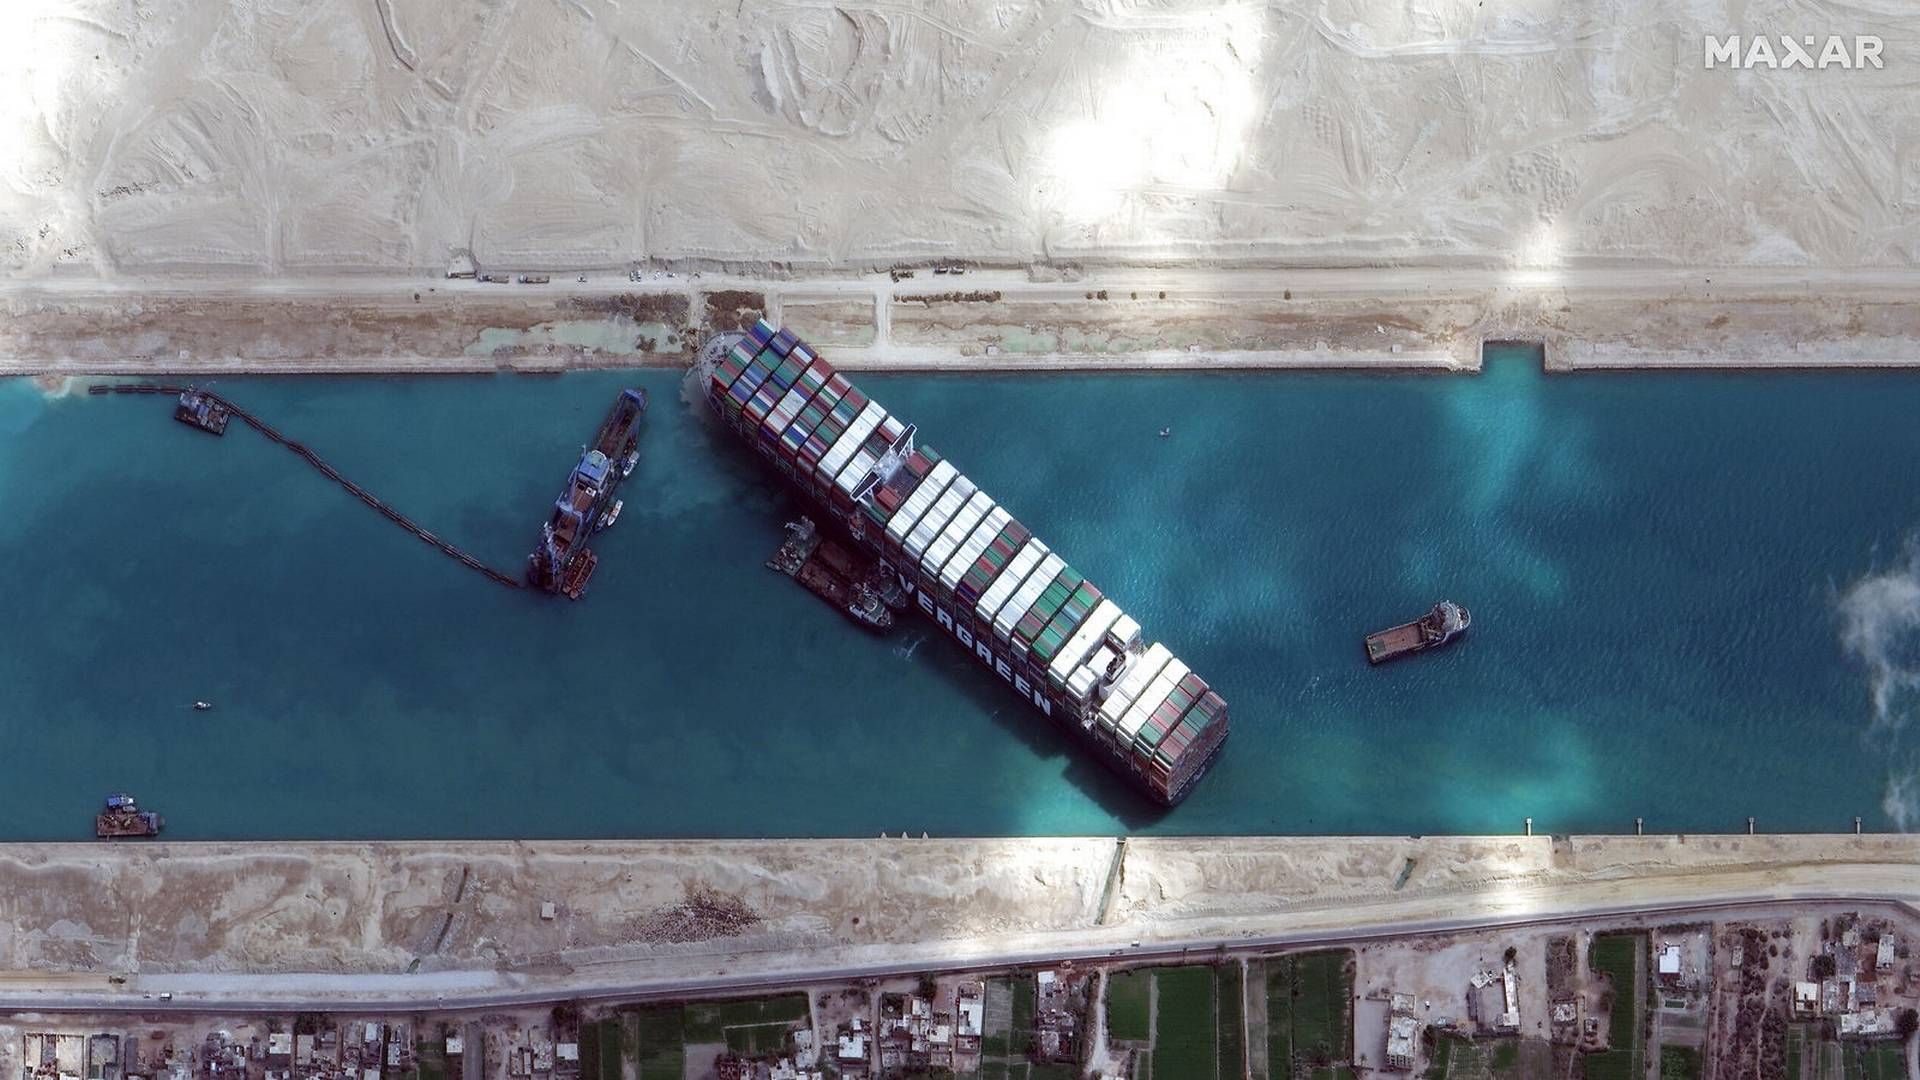 Container vessel Ever Given blocked the Suez Canal for six days – causing major problems for the world trade. | Photo: Maxar Technologies/Reuters/Ritzau Scanpix